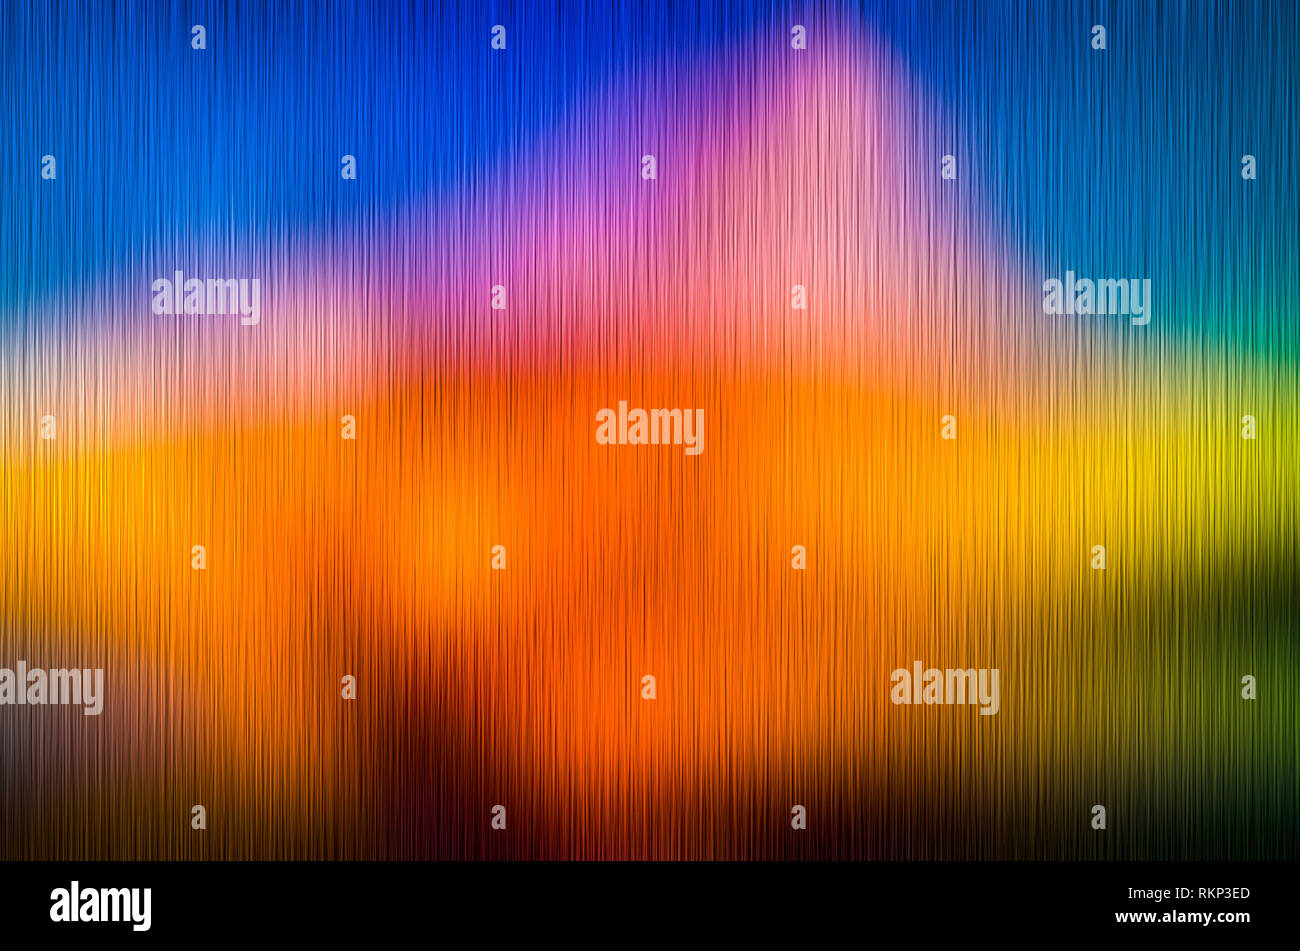 Multicolored curtain style abstract background to show celebration, festivities, happiness, etc. Stock Photo